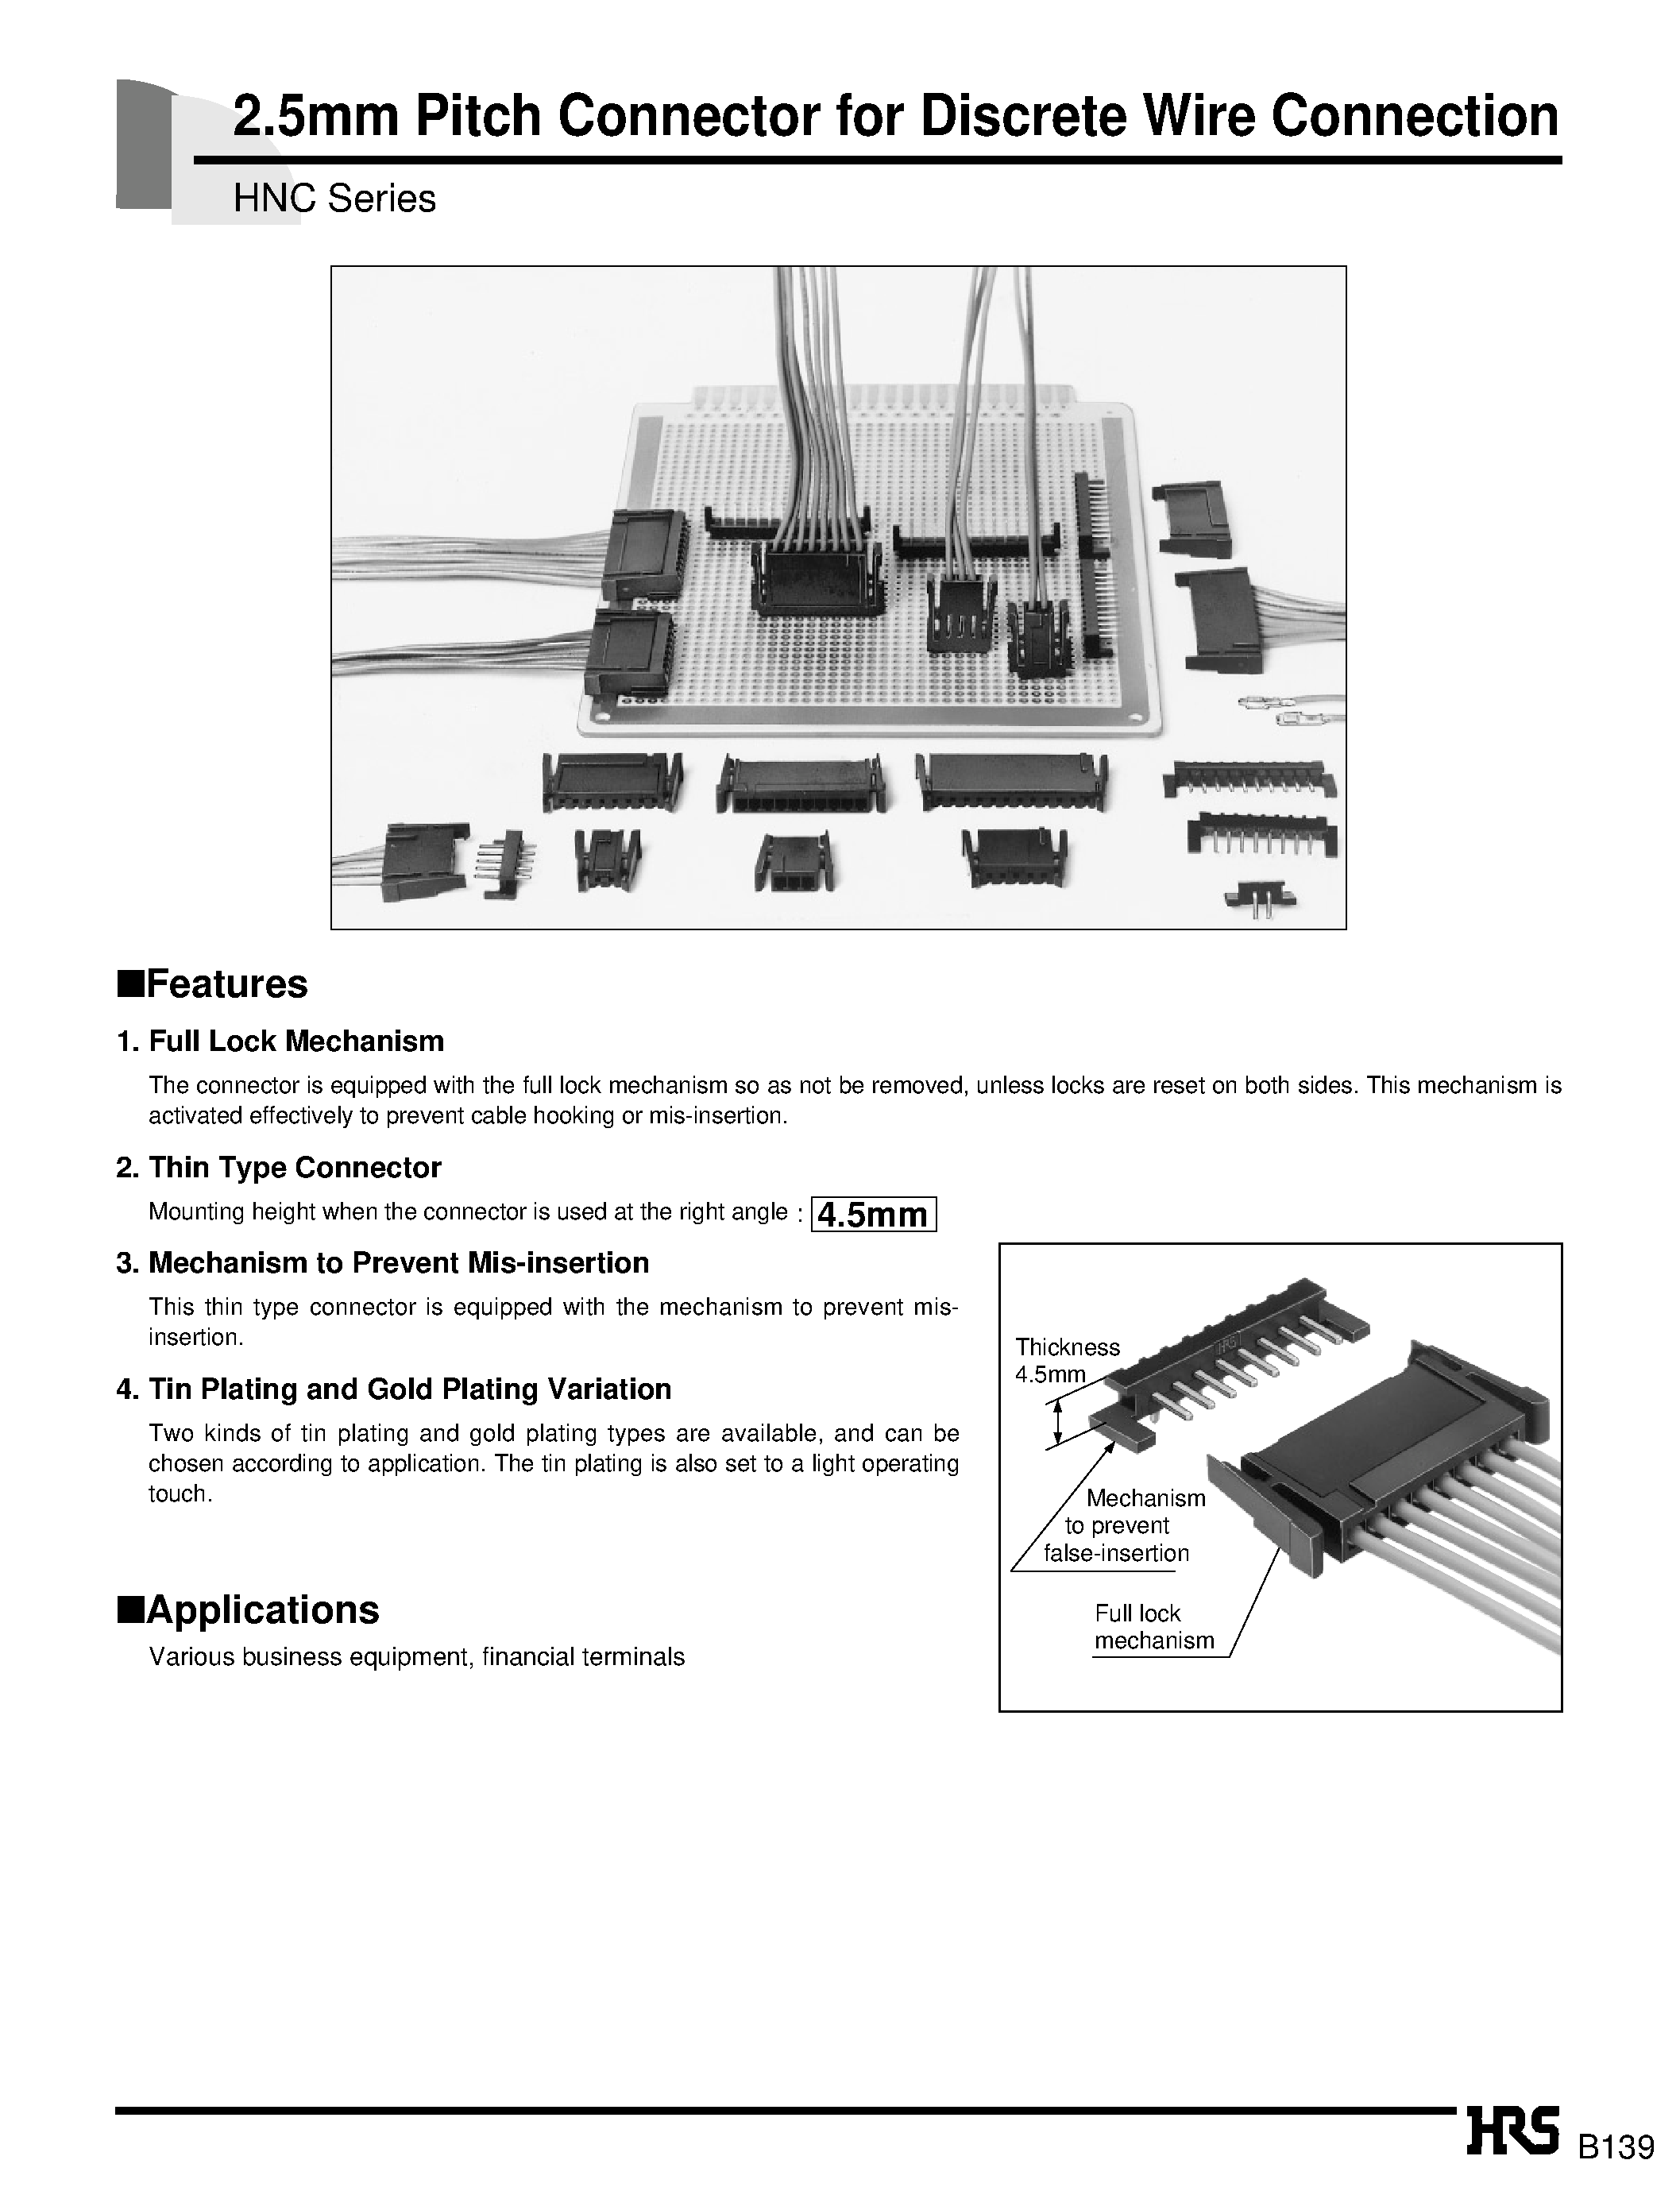 Datasheet HNC-2.5S-D-A - 2.5mm Pitch Connector for Discrete Wire Connection page 1